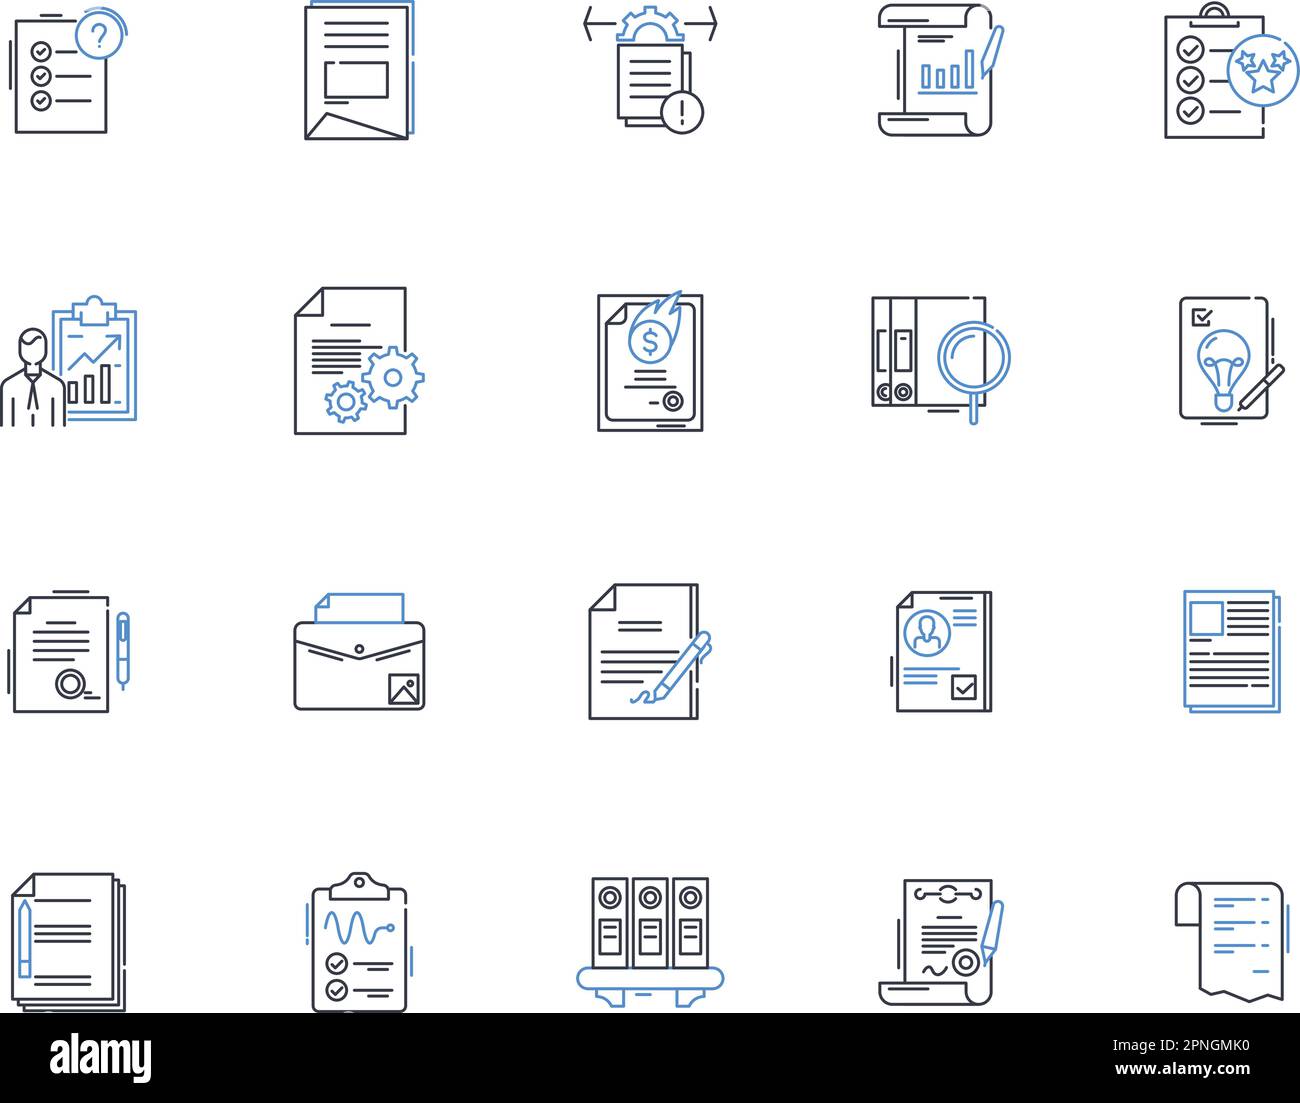 Memorandums line icons collection. Communication, Policy, Agreement, Record, Protocol, Memo, Direction vector and linear illustration. Consensus Stock Vector